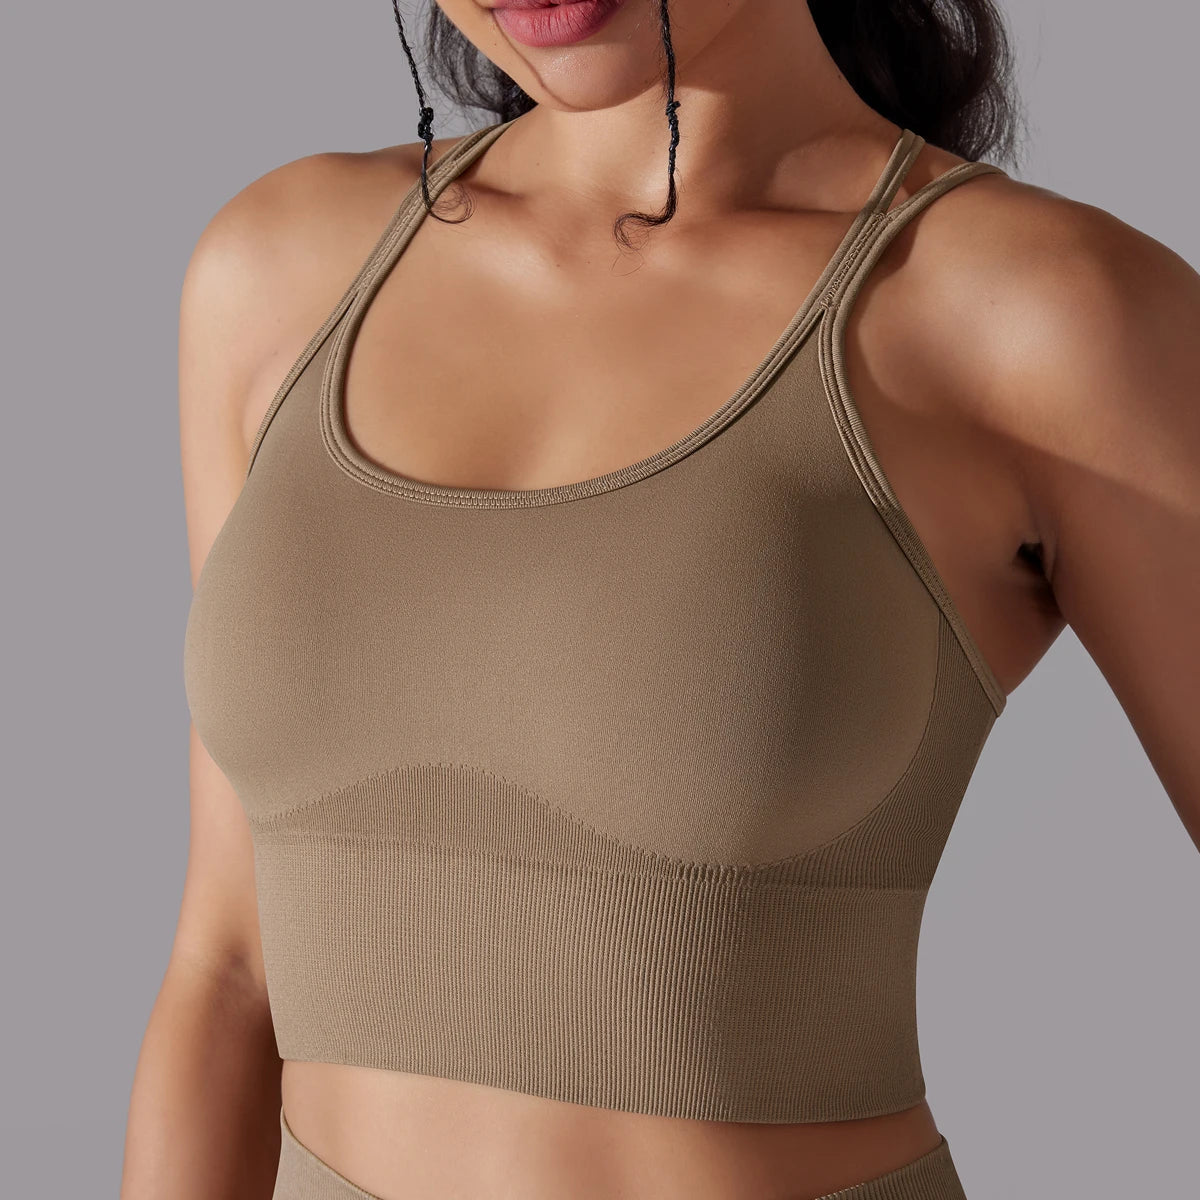 Sexy Beautiful Back Sports Bra Breathable Workout Bra Push up Gym Top Women Fitness Yoga Bra Quick-Dry Running Yoga Clothing